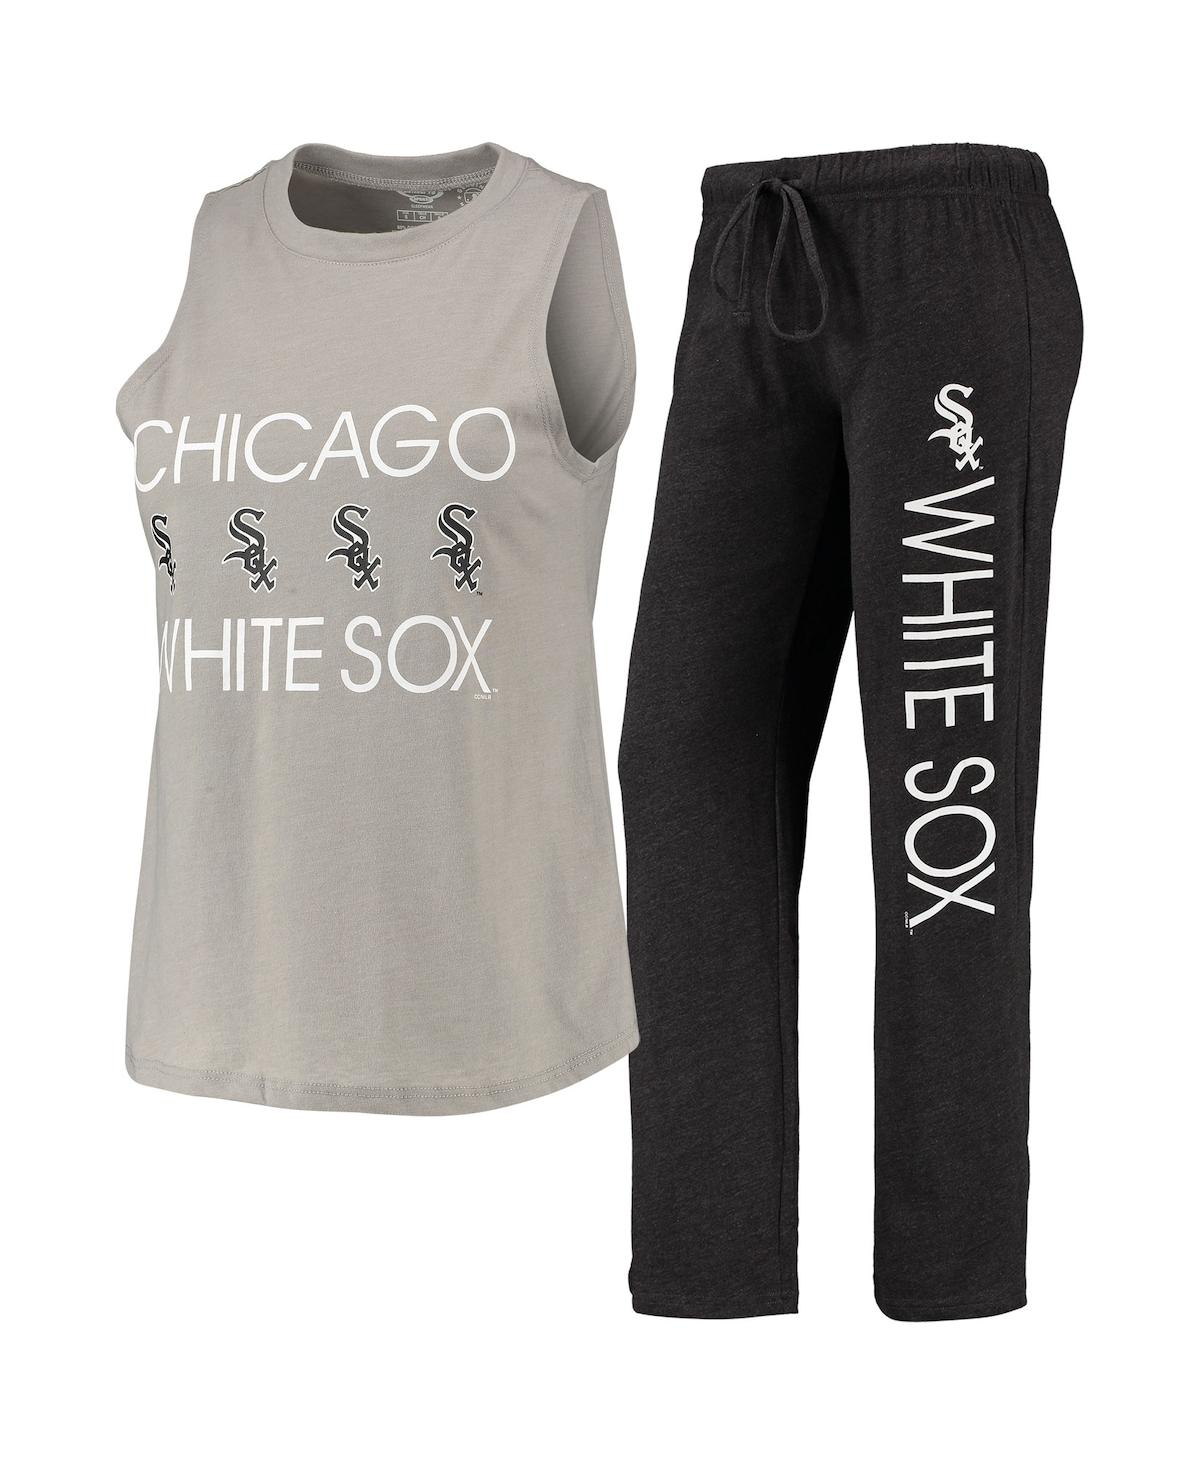 Women's Concepts Sport Black, Gray Chicago White Sox Meter Muscle Tank Top and Pants Sleep Set - Black, Gray